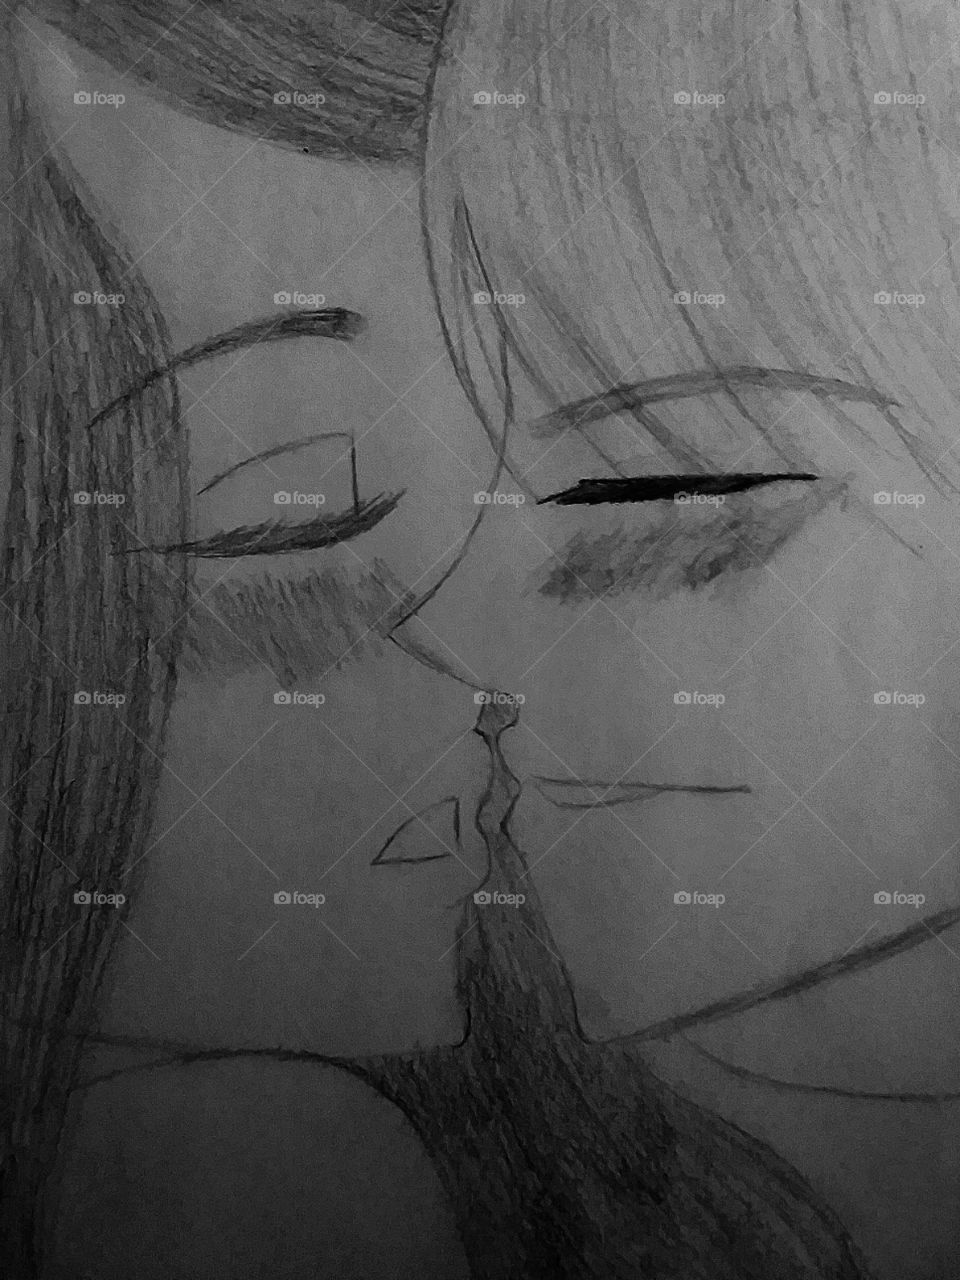 gorgeous and emotional handrawn anime image of a young boy and girl mid-kiss in greyscale